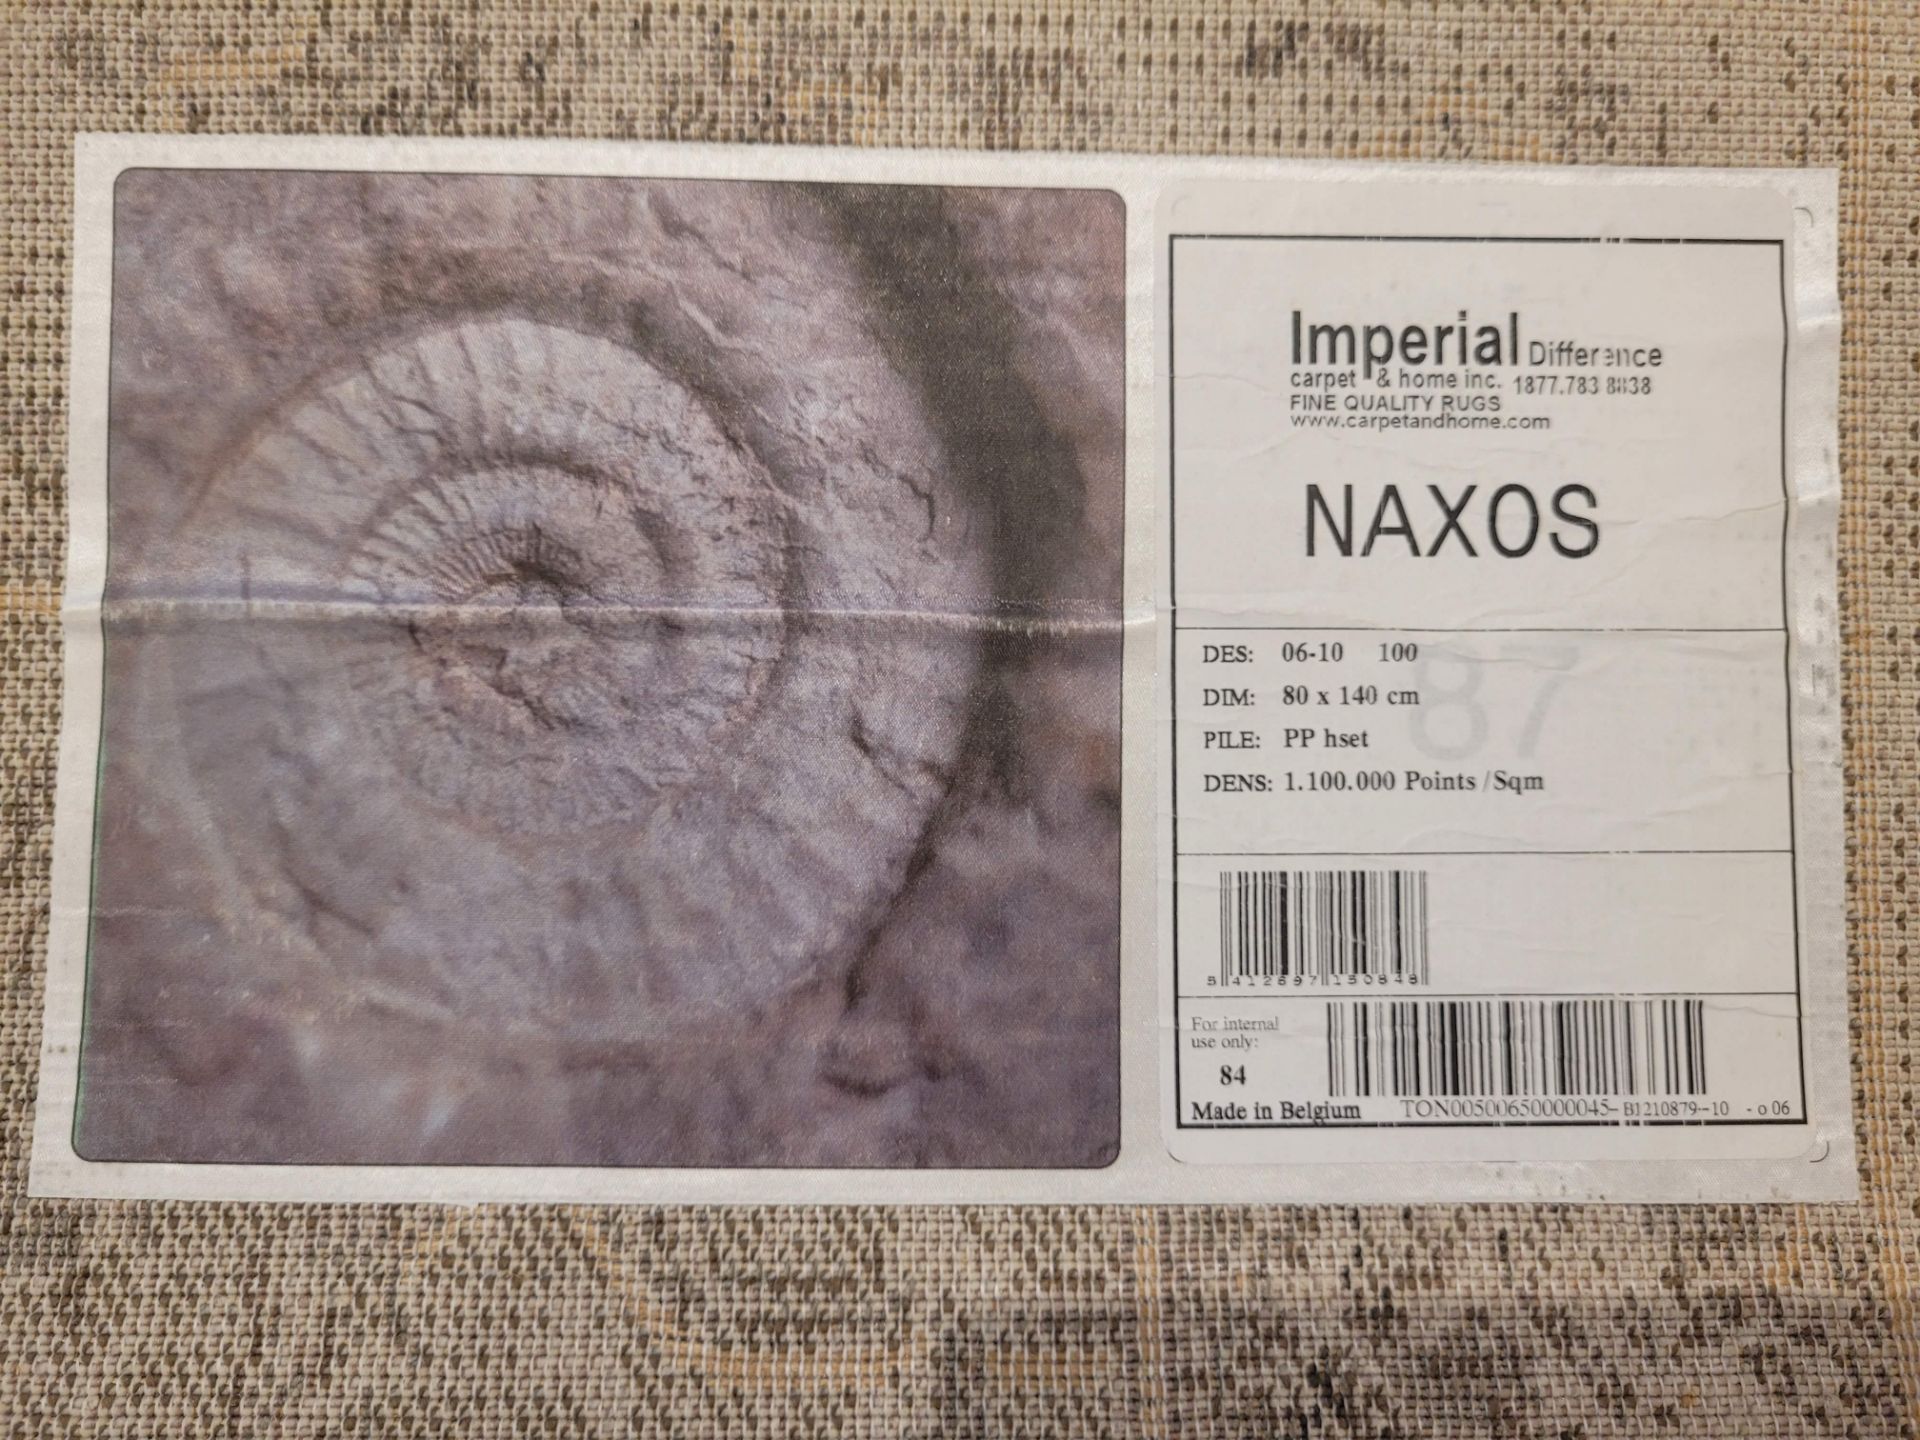 2'5" X 4'5" NAXOS MADE IN BELGIUM - MSRP $267.00 EA. (LOCATED IN WALL-TO-WALL) INVENTORY CODE: 06-10 - Image 3 of 3